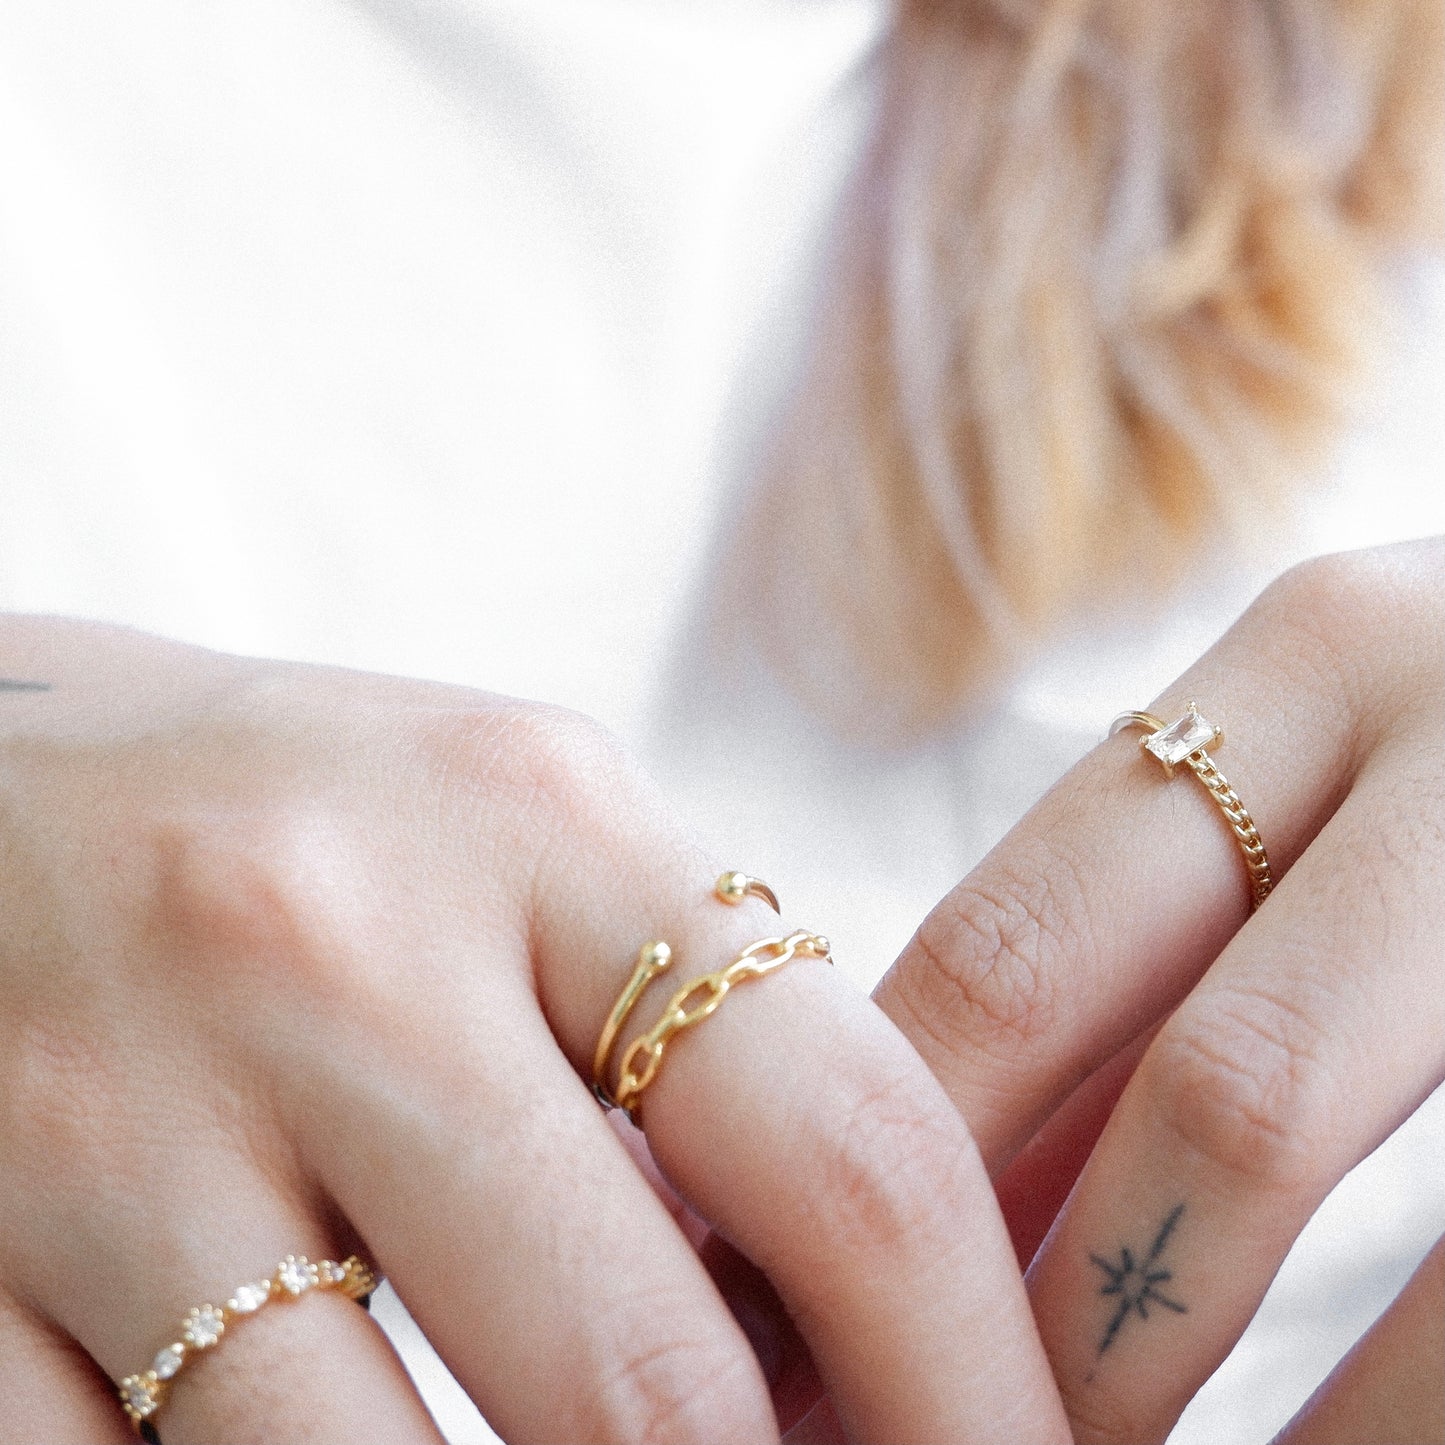 The Any-size Leila Ring